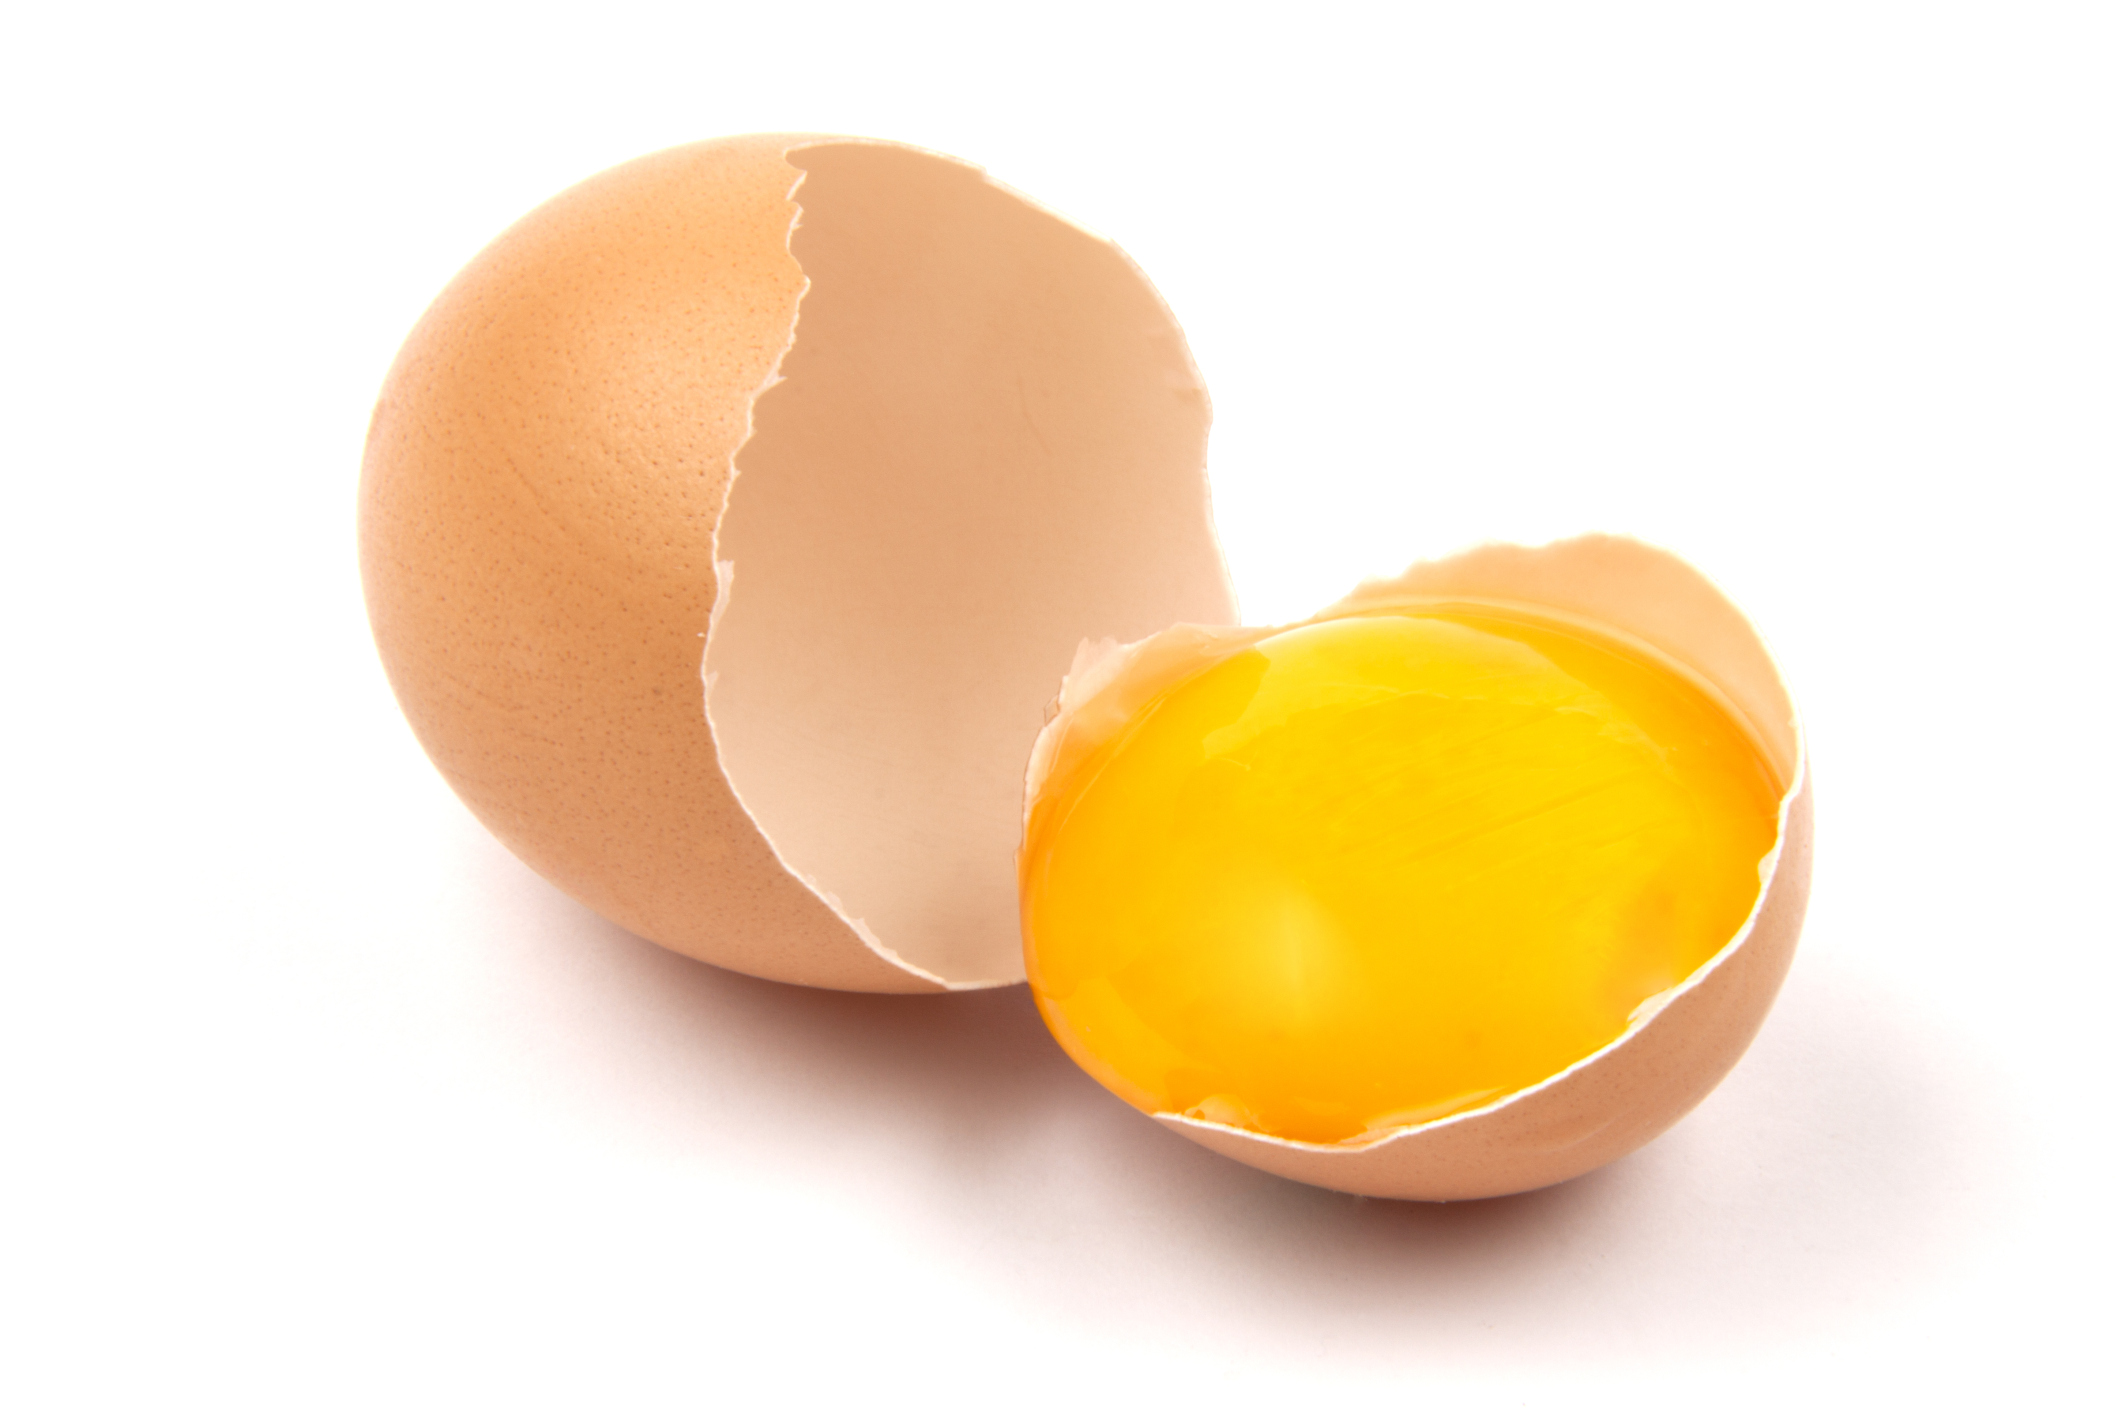 . Hdpng.com Crystal Broken Egg Png And Vector. Itu0027S Friday Which Means The Emerald Crew Has Some Fun Knowledge For You To Use This - Broken Egg, Transparent background PNG HD thumbnail